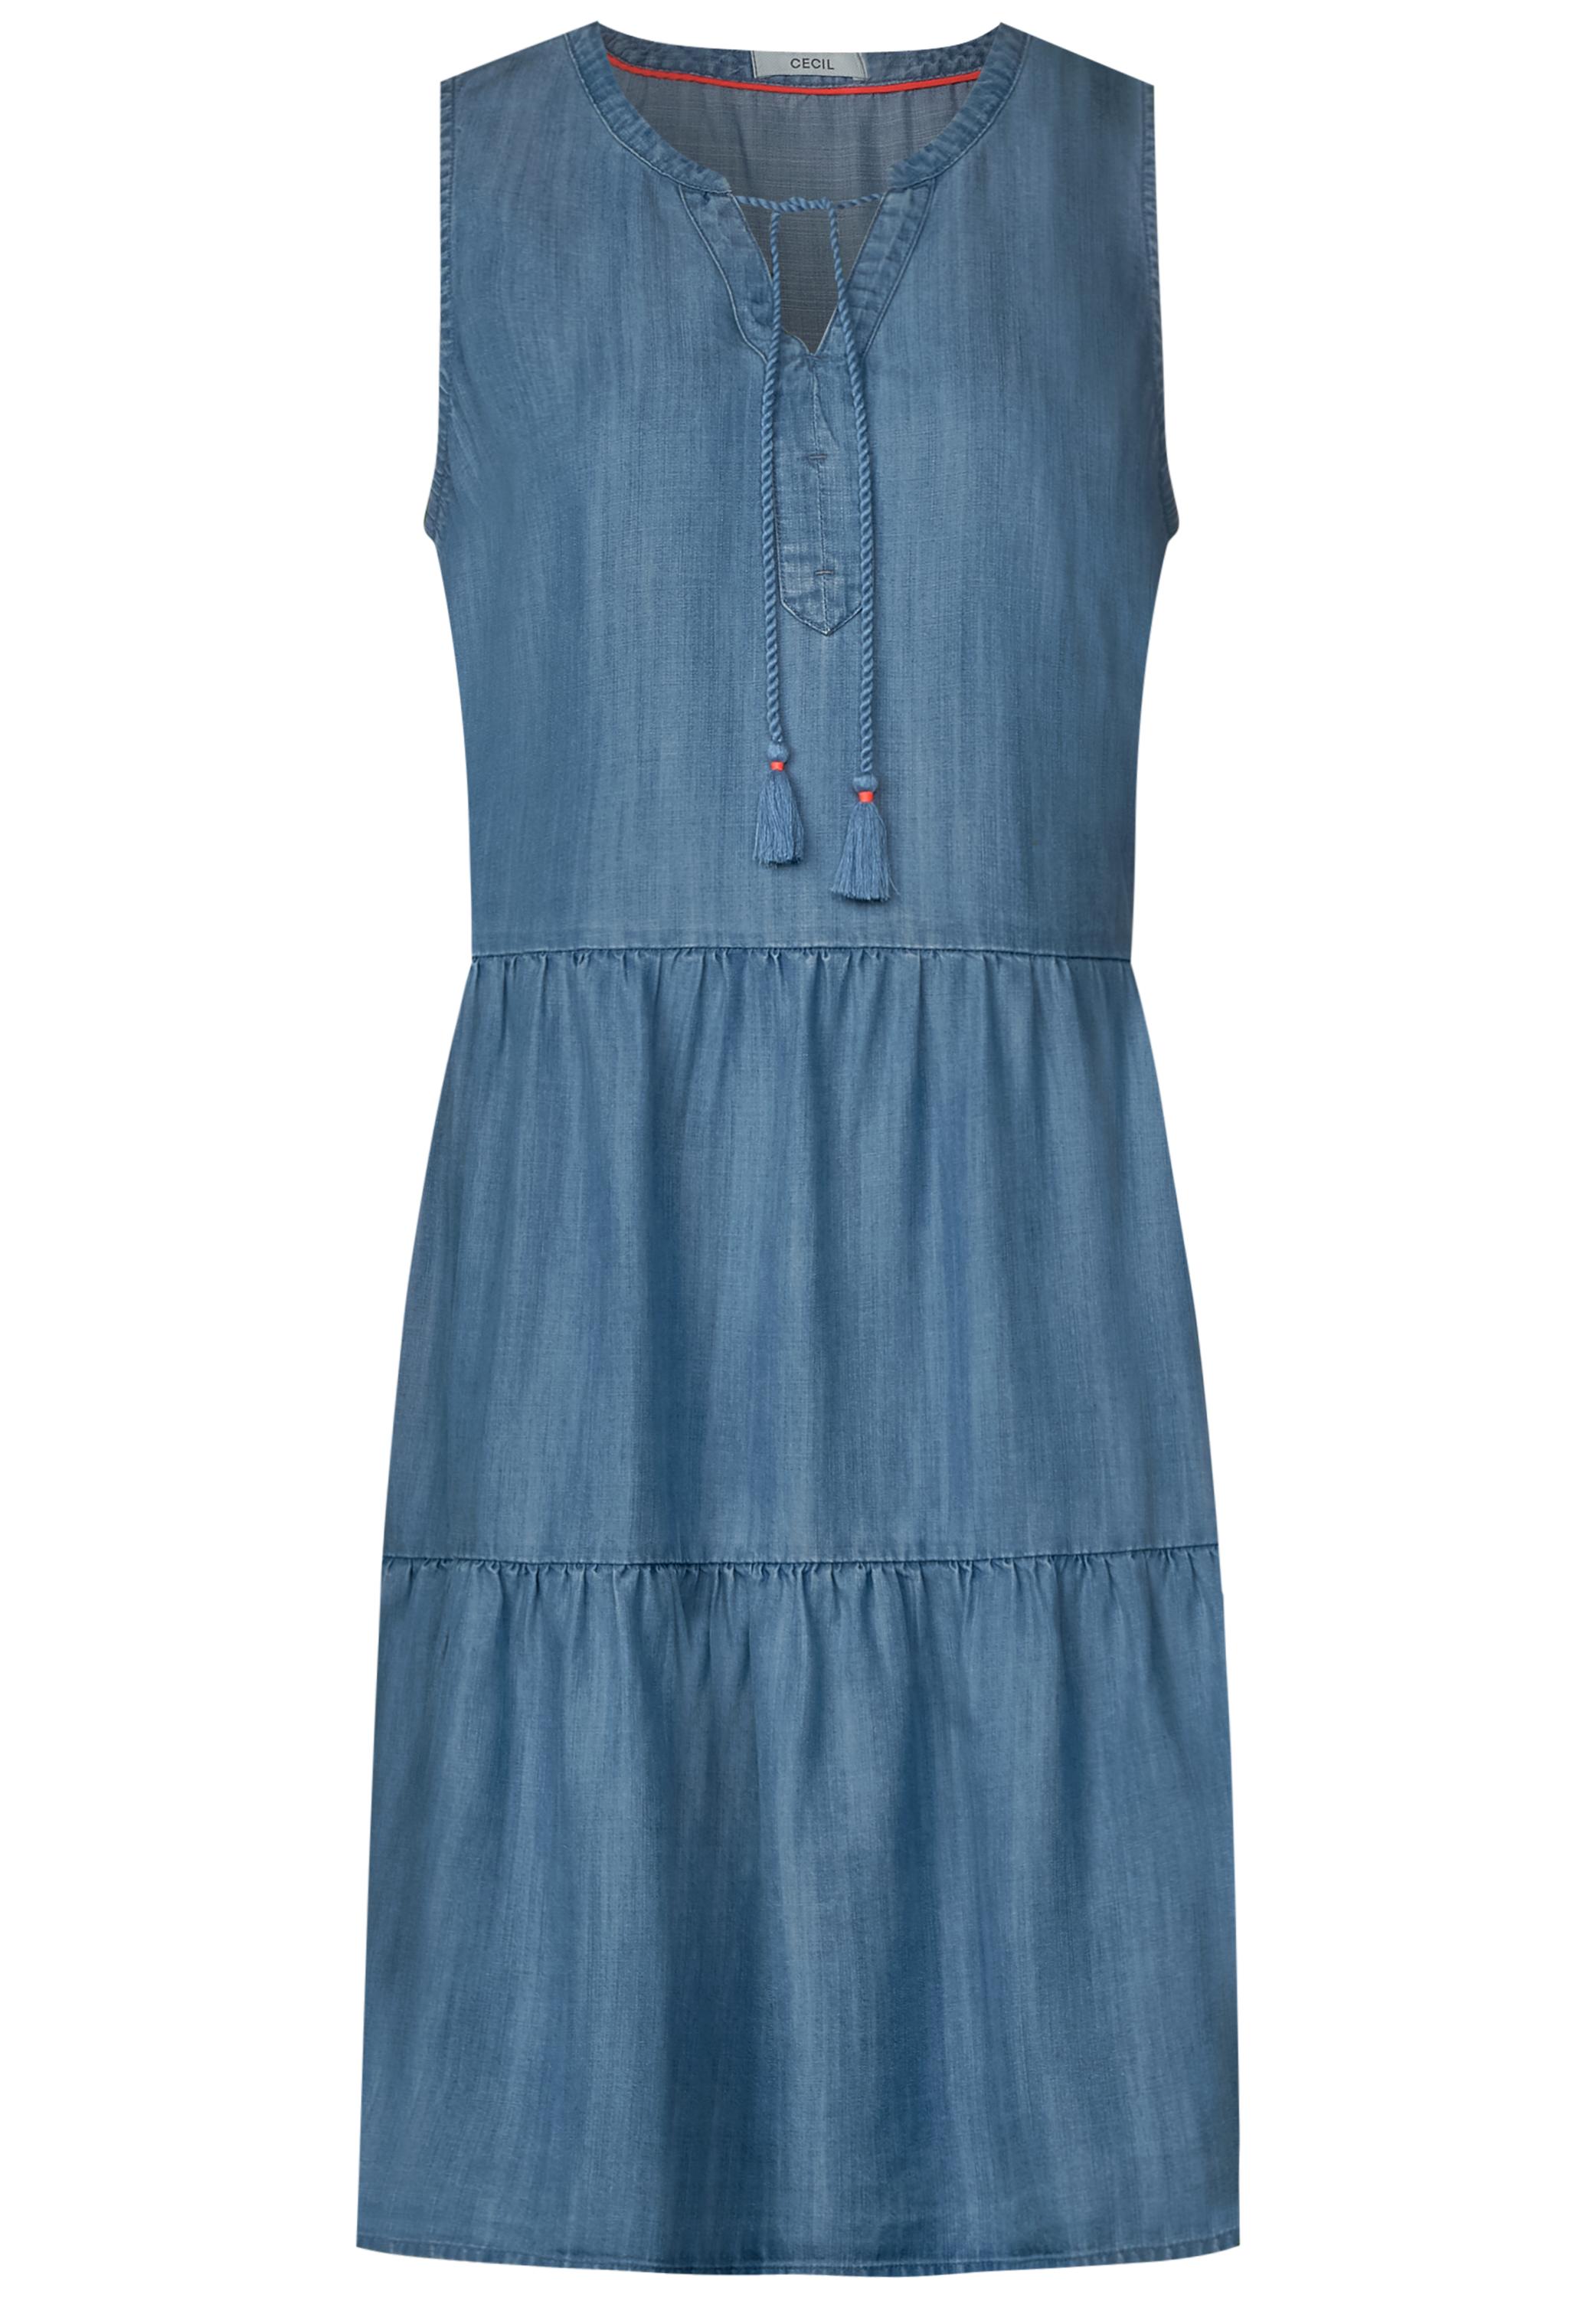 CECIL Kleid in Mid Blue Wash B142459-10283 - CONCEPT Mode